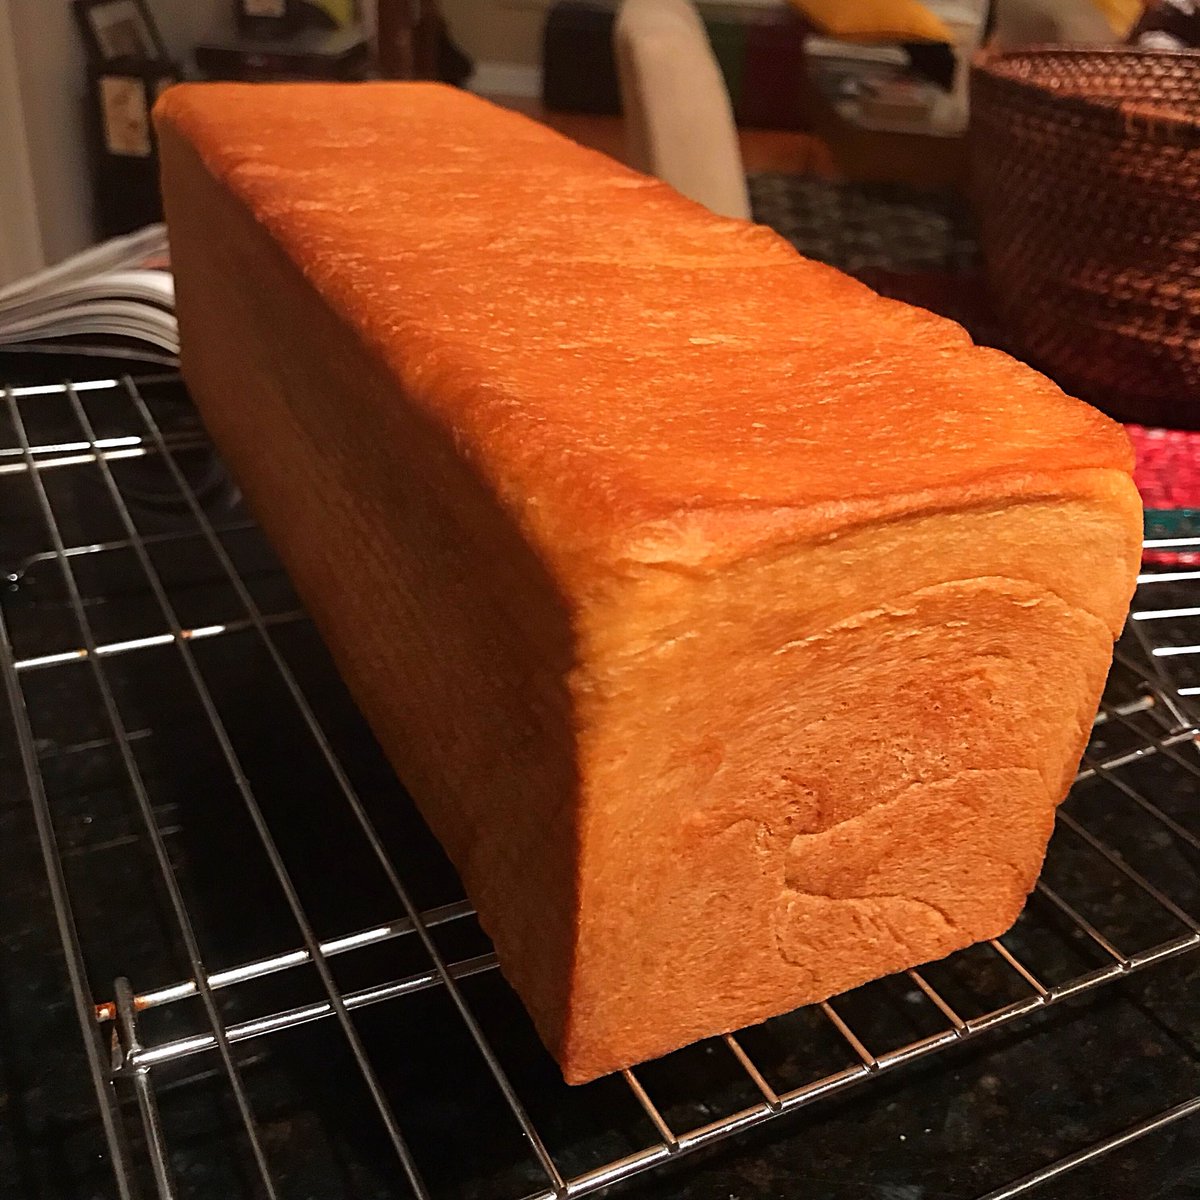 Bread #14: Pain de Mie. This bread makes me giggle because it’s a rectangular prism. That’s because it’s made with a Pullman pan—which Pullman porters would use to make loaves that stack neatly on the train! HOW COOL IS THAT.